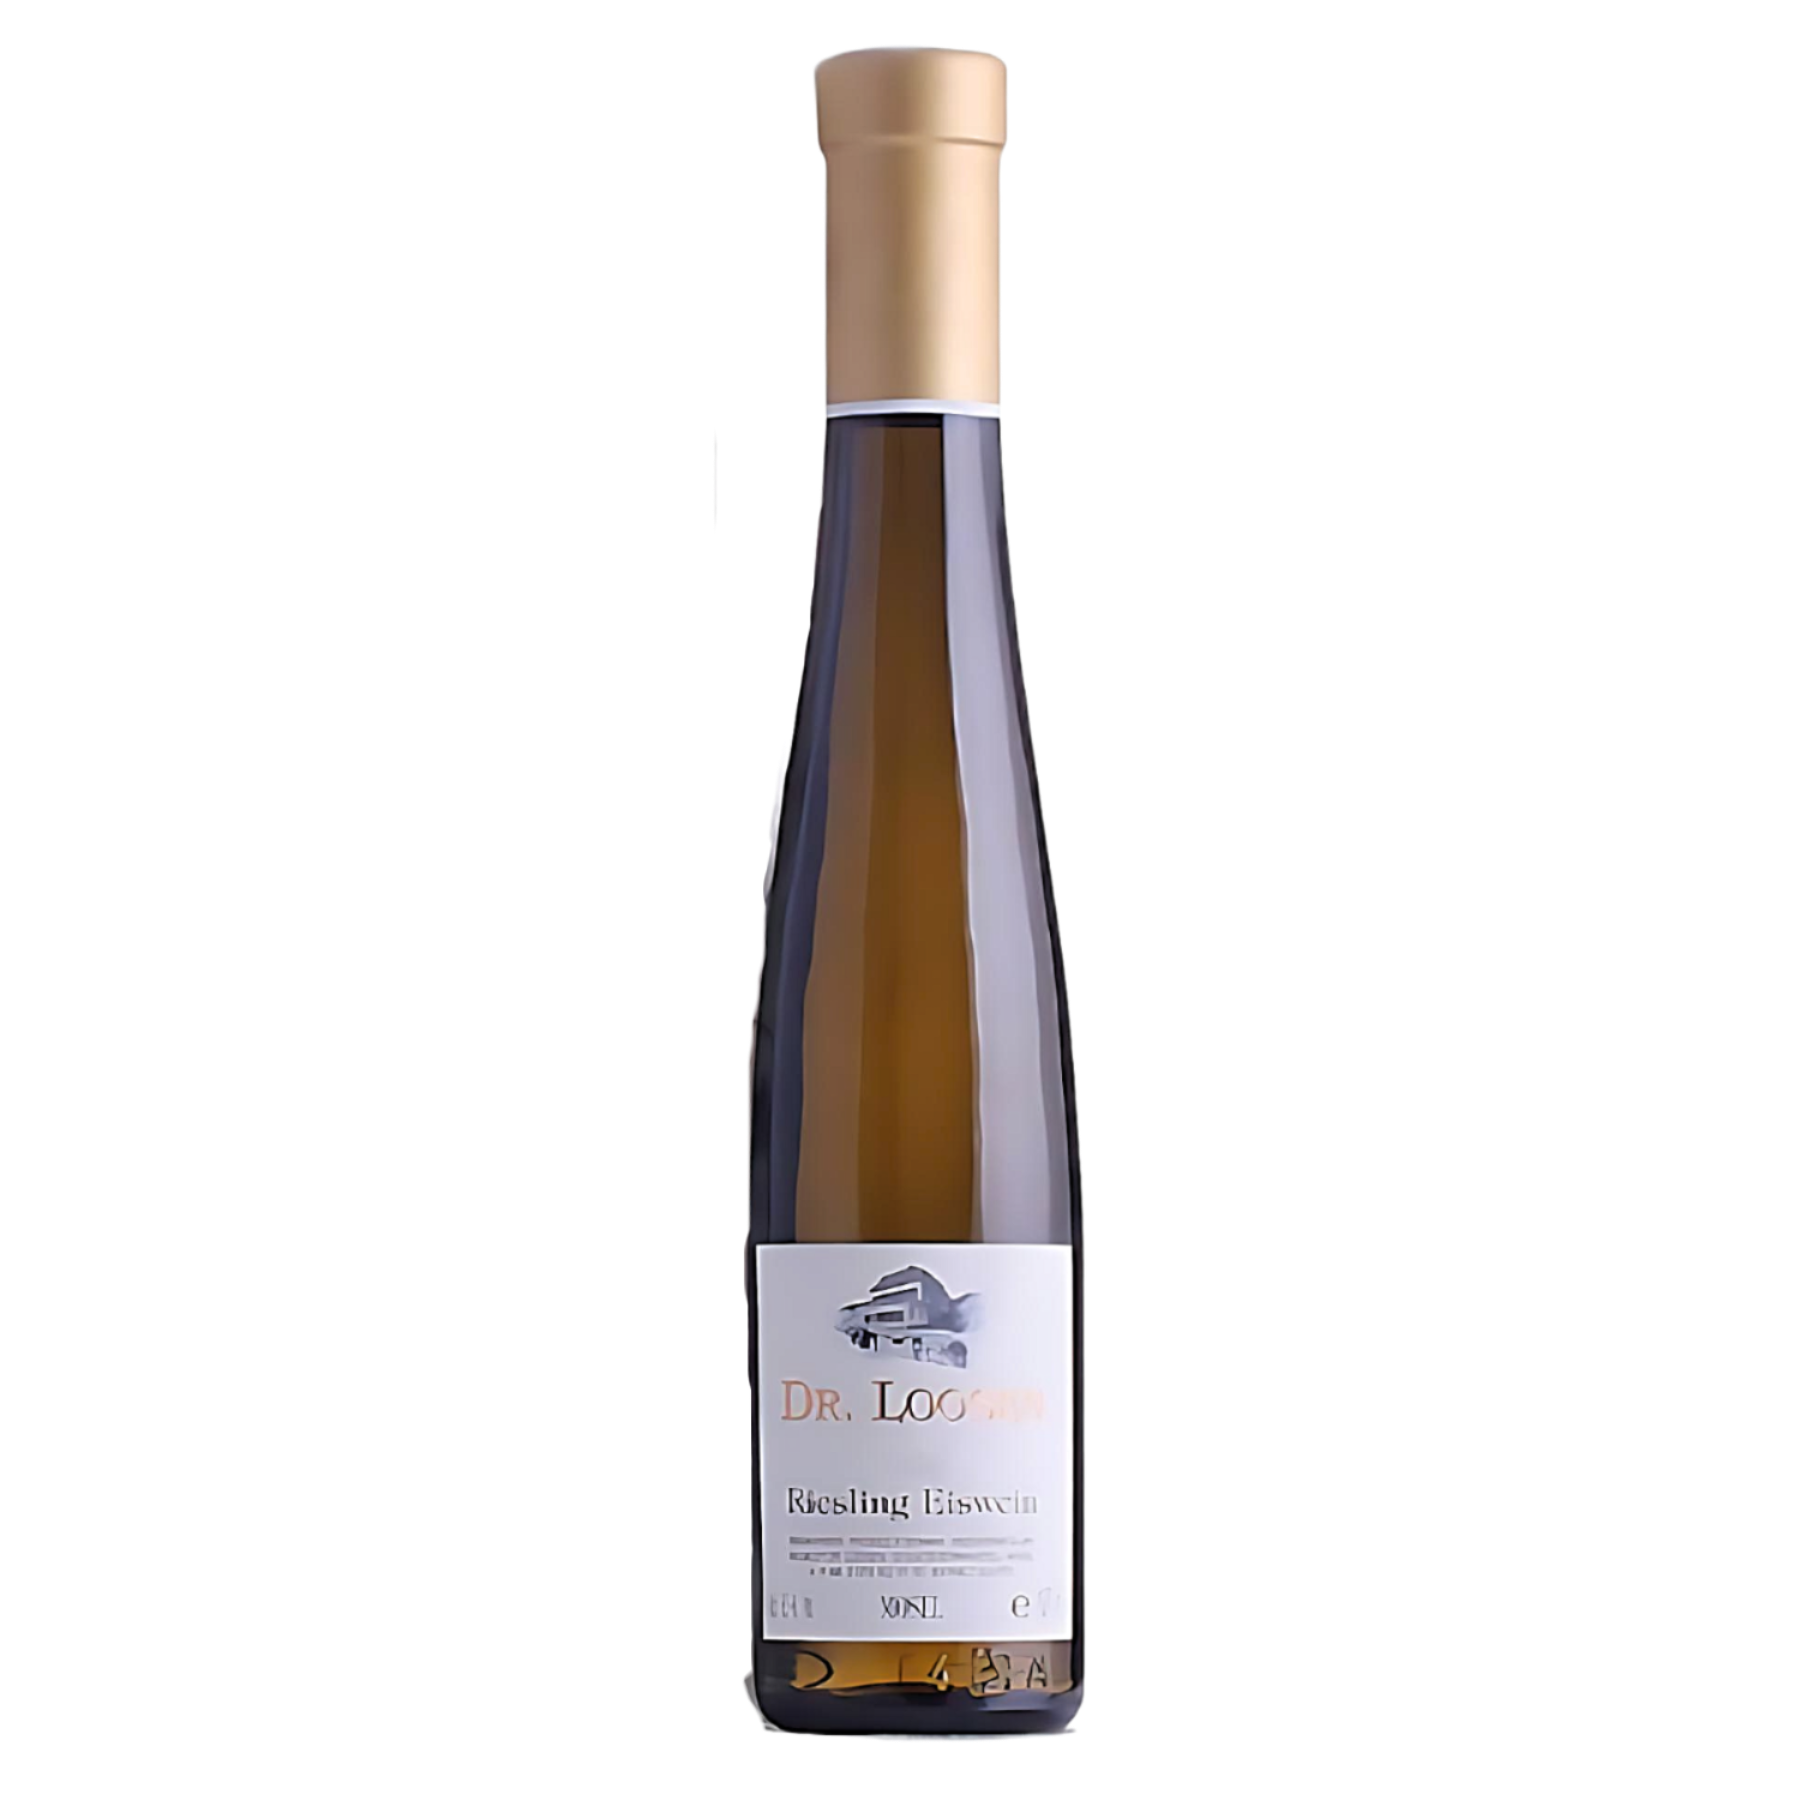 Dr. Loosen Riesling Eiswein  White